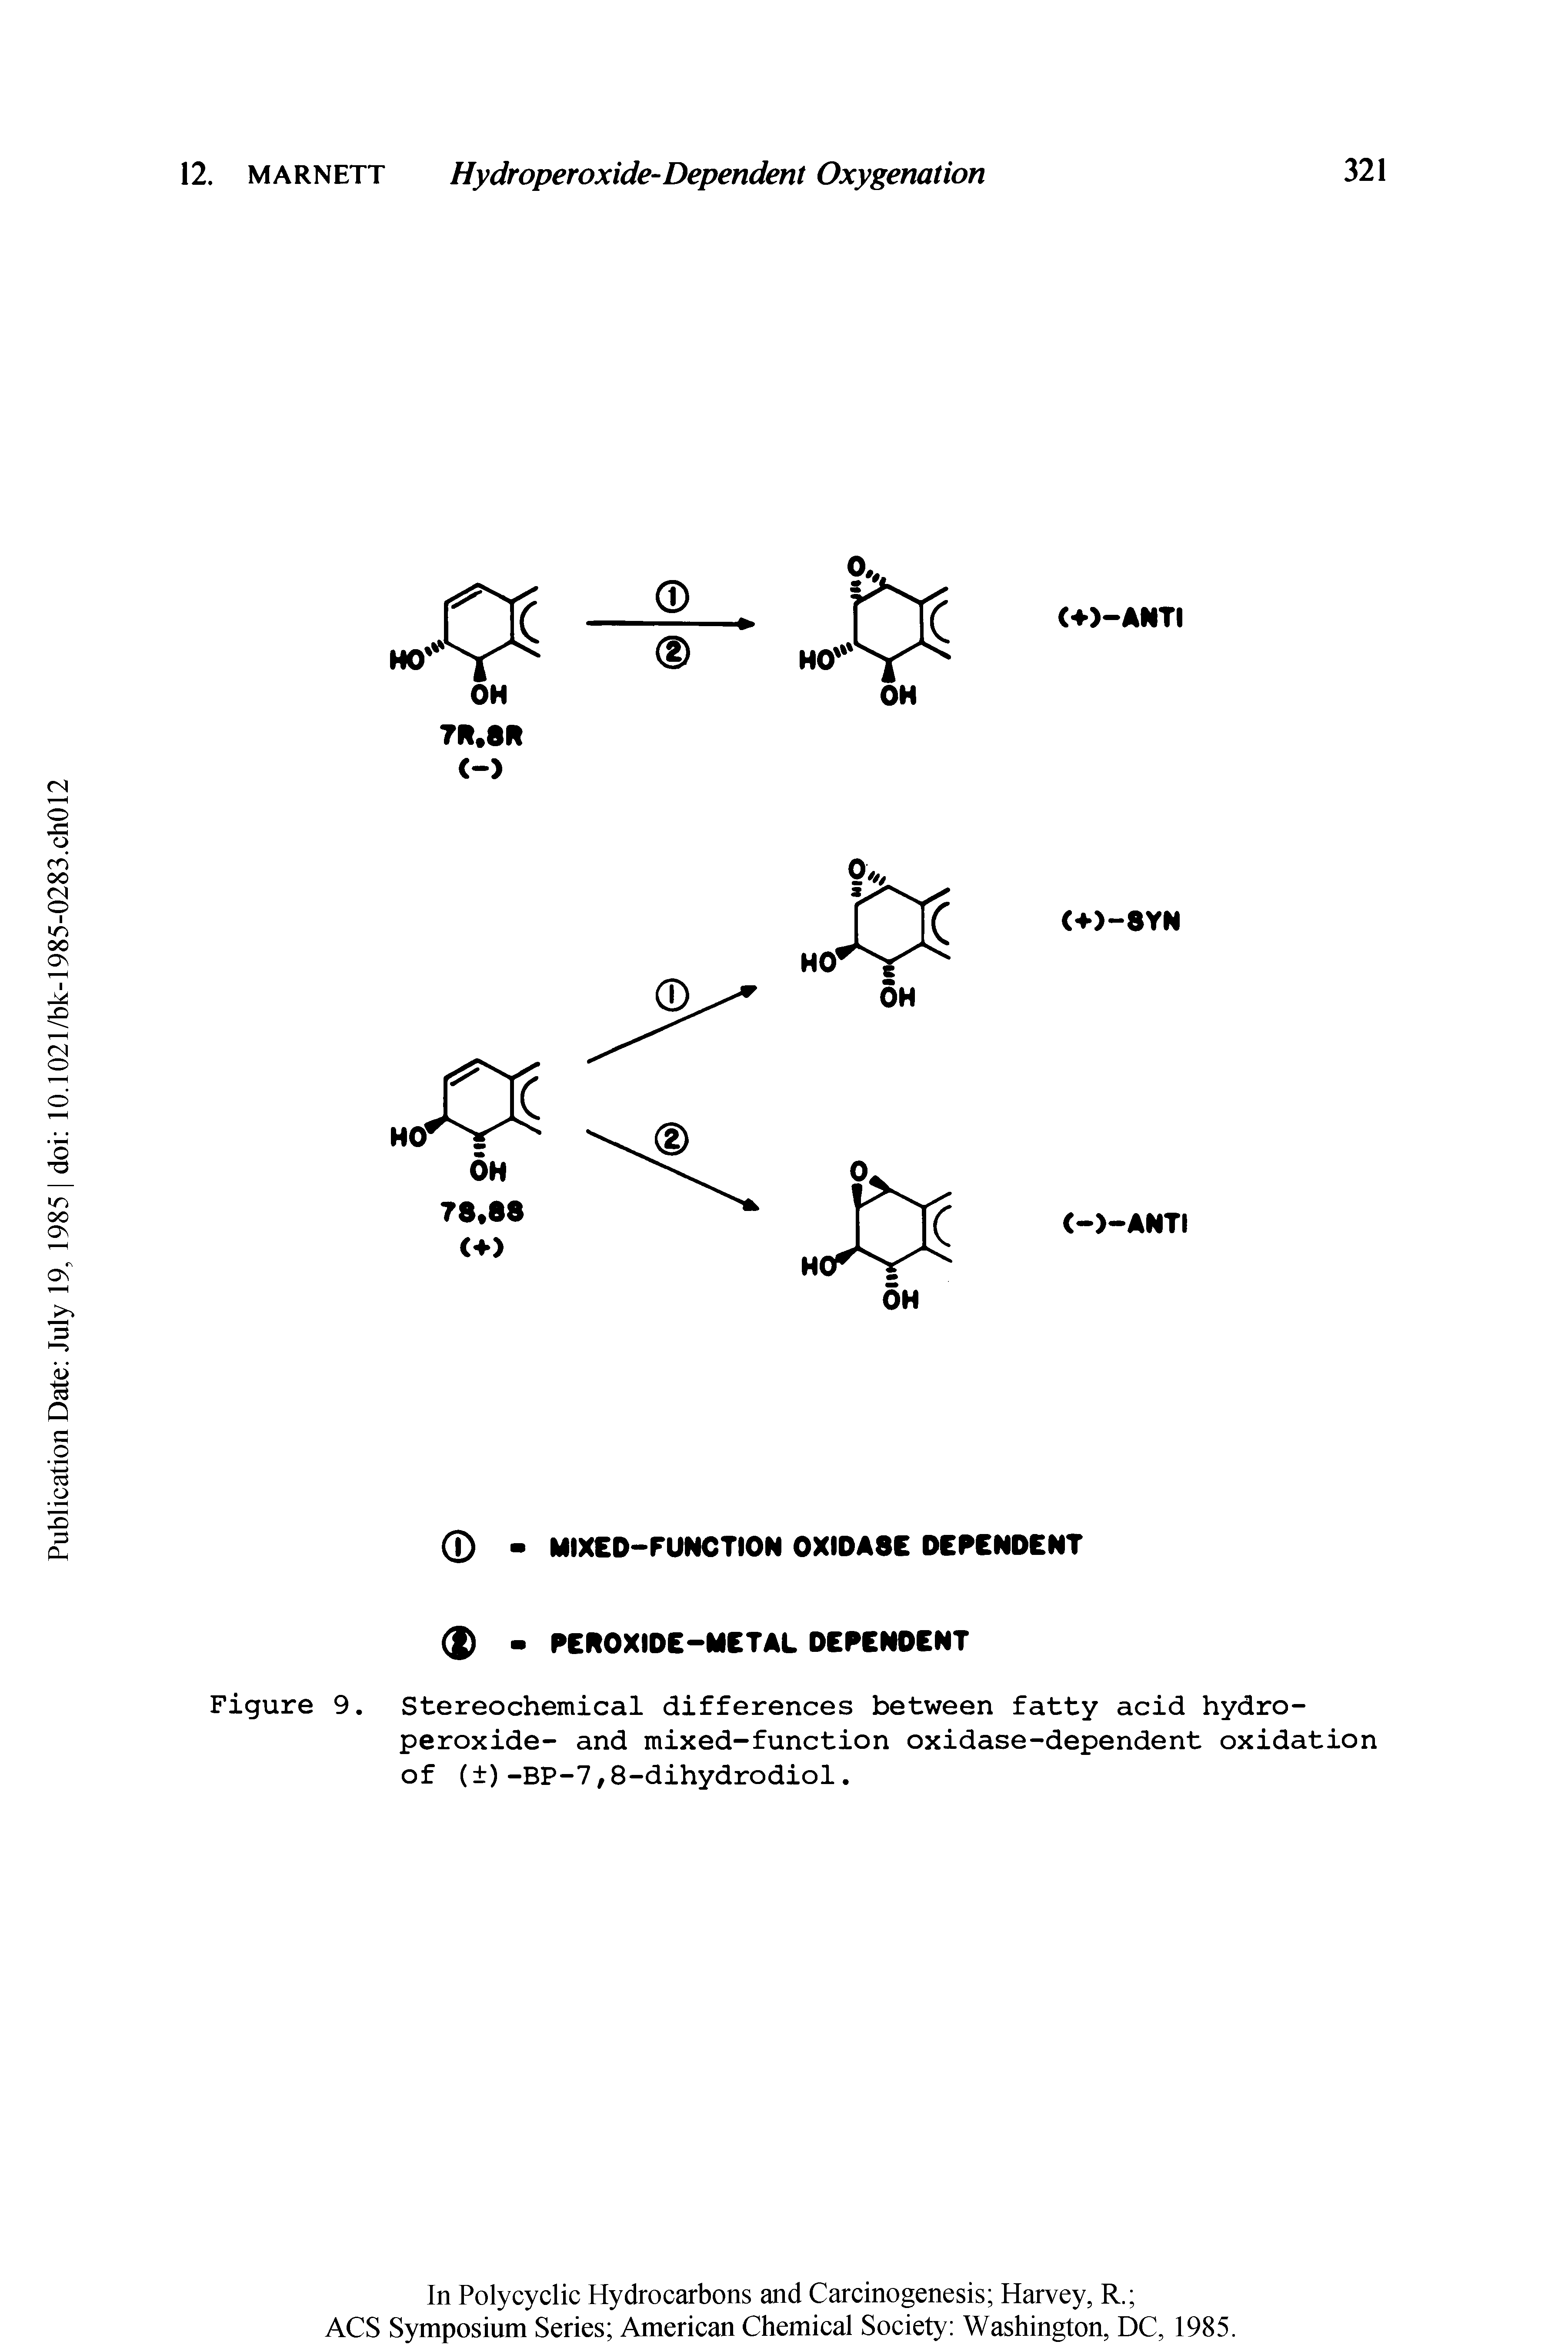 Figure 9. Stereochemical differences between fatty acid hydroperoxide- and mixed-function oxidase-dependent oxidation of ( ) -BP-7,8-dihydrodiol.